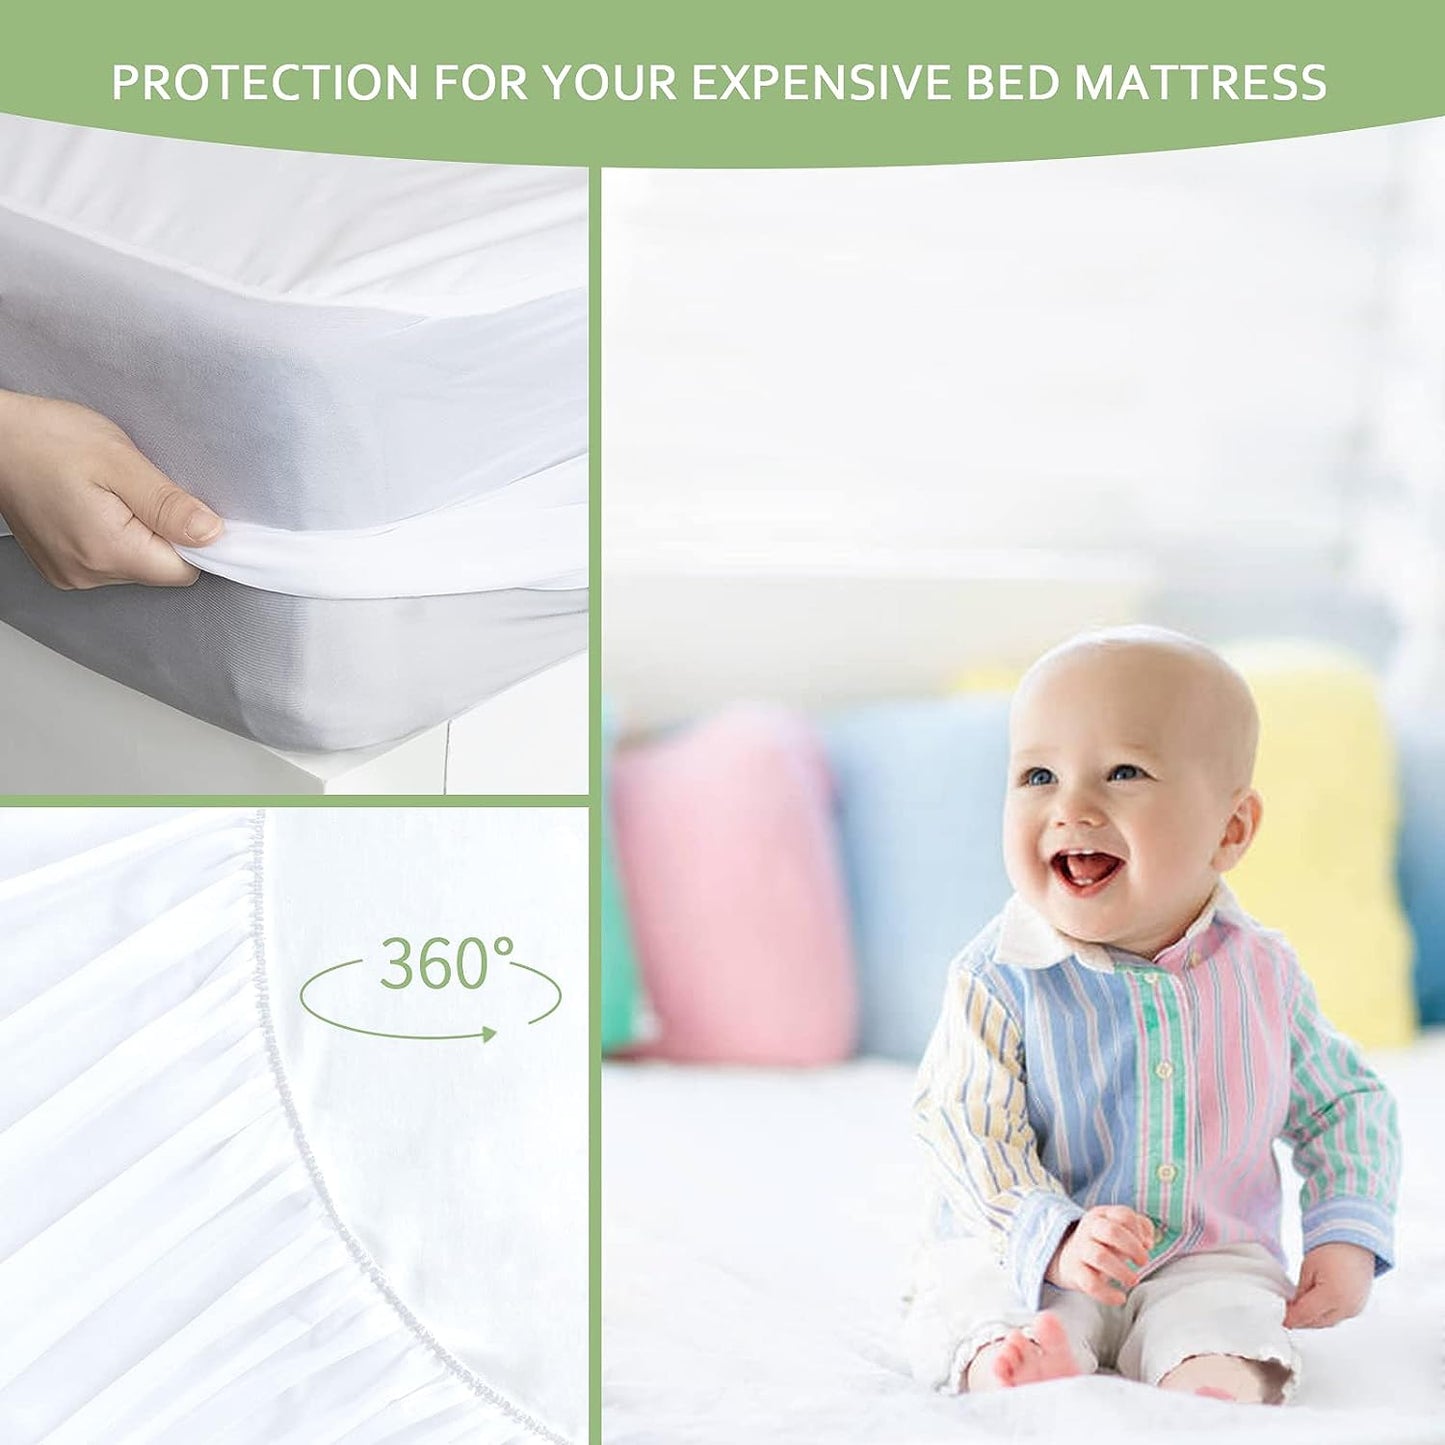 Mattress Cover/Protector- Bamboo Jacquard Air Fabric, Waterproof, Fitted Up to 14" Deep